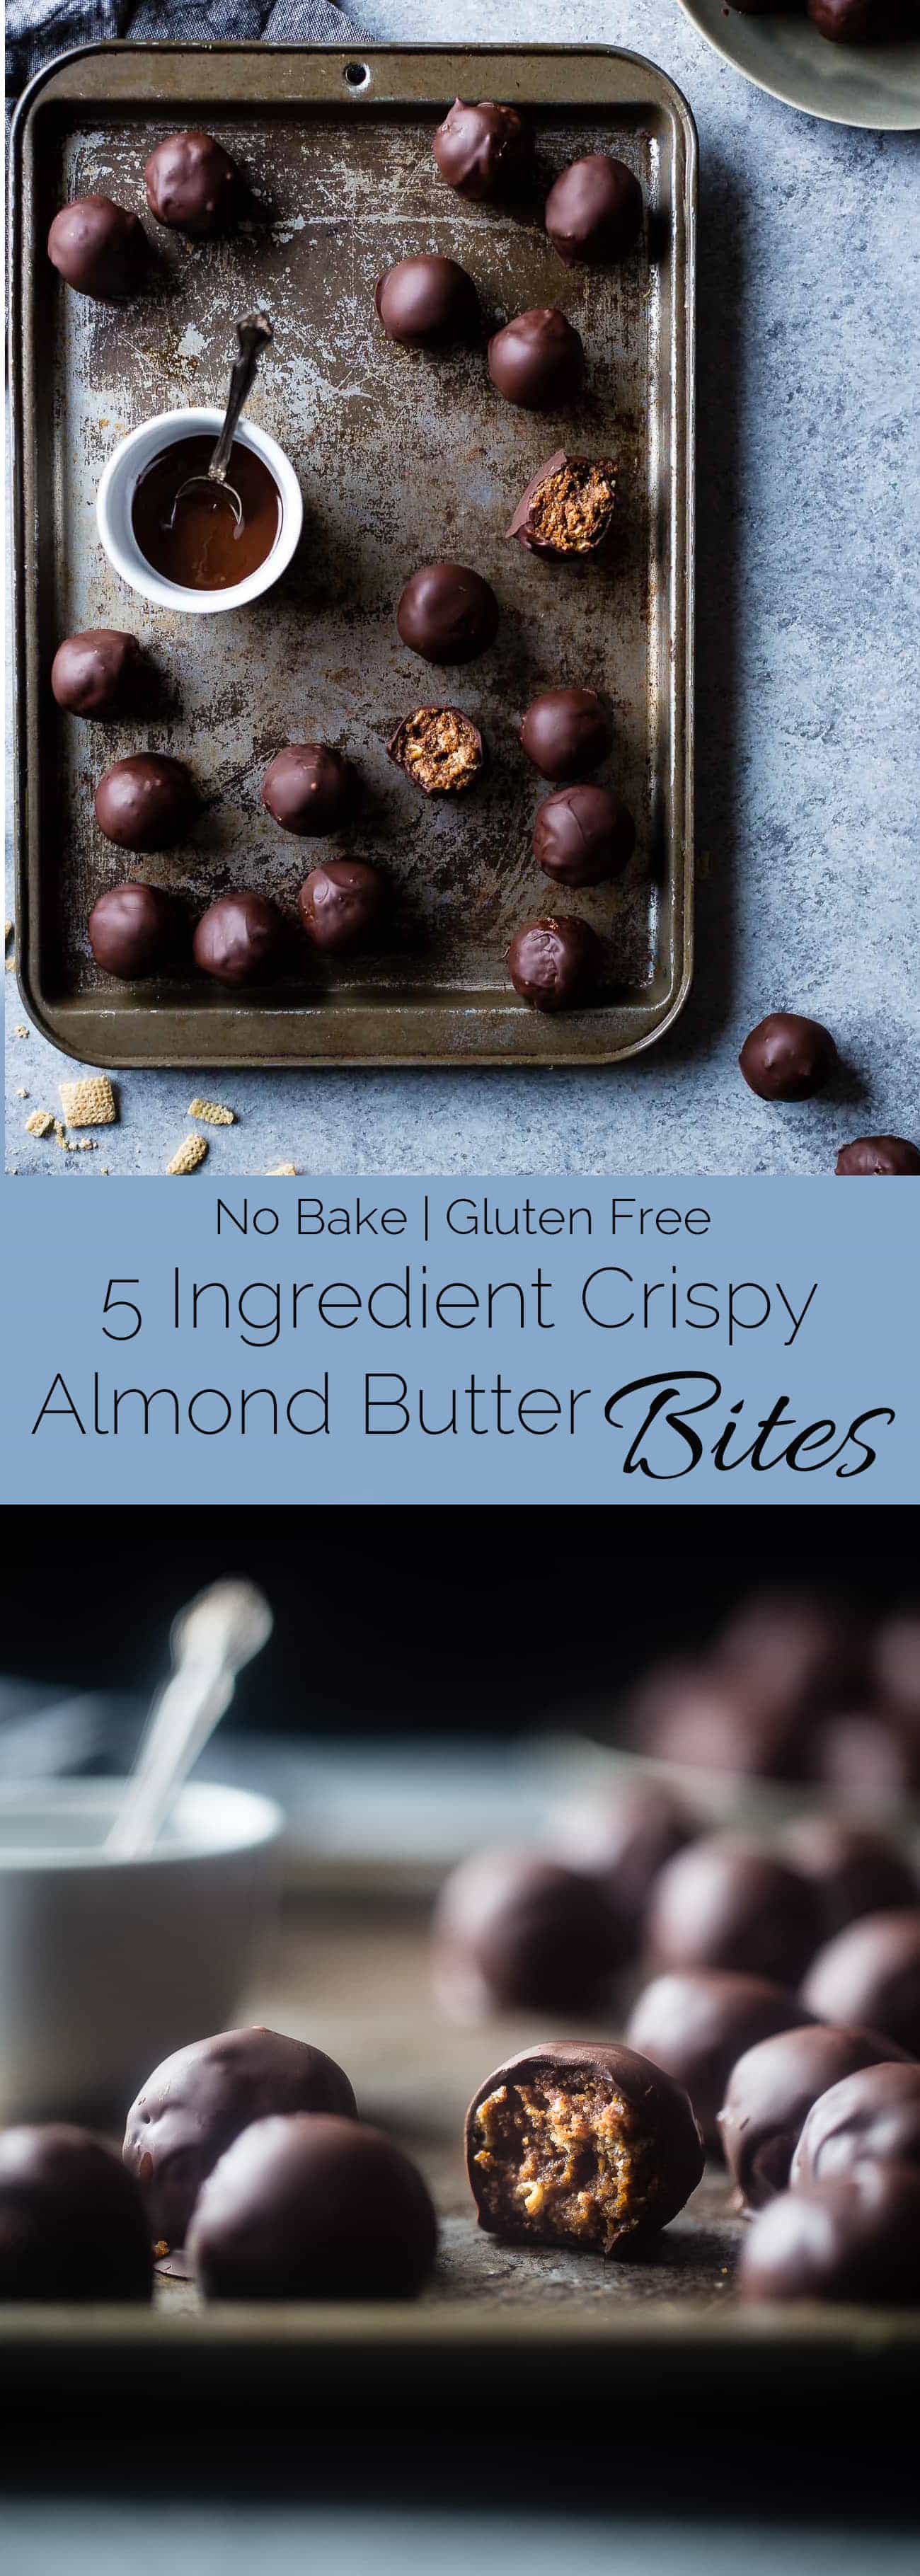 No Bake Crispy Almond Butter Chocolate Bites - These super easy, gluten free no-bake bites only use 5 ingredients! They're a healthier treat to curb your sweet tooth, and they are only 100 calories! | Foodfaithfitness.com | @FoodFaithFit